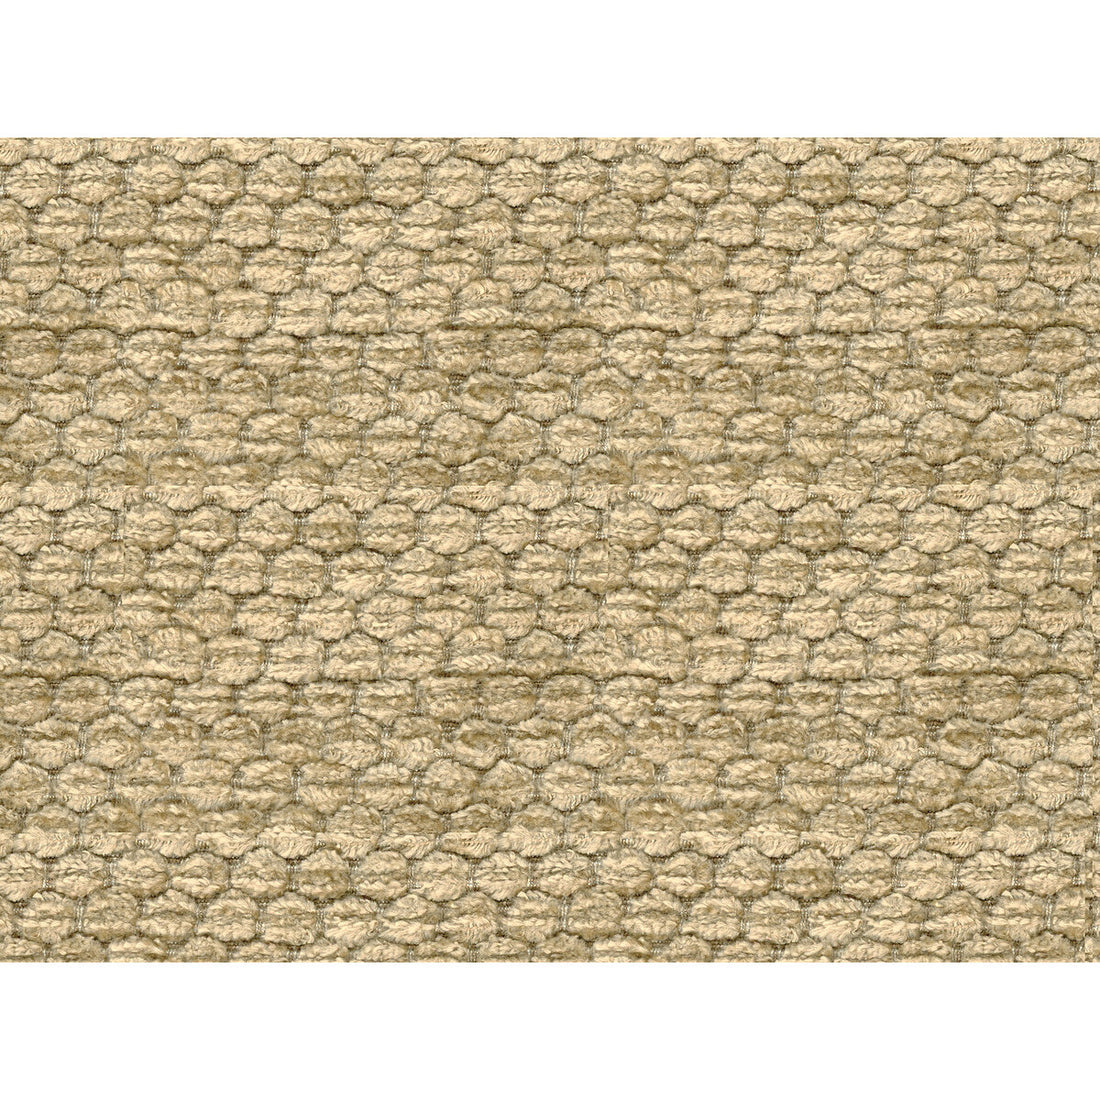 Lonsdale fabric in barley color - pattern 2016125.164.0 - by Lee Jofa in the Furness Weaves collection